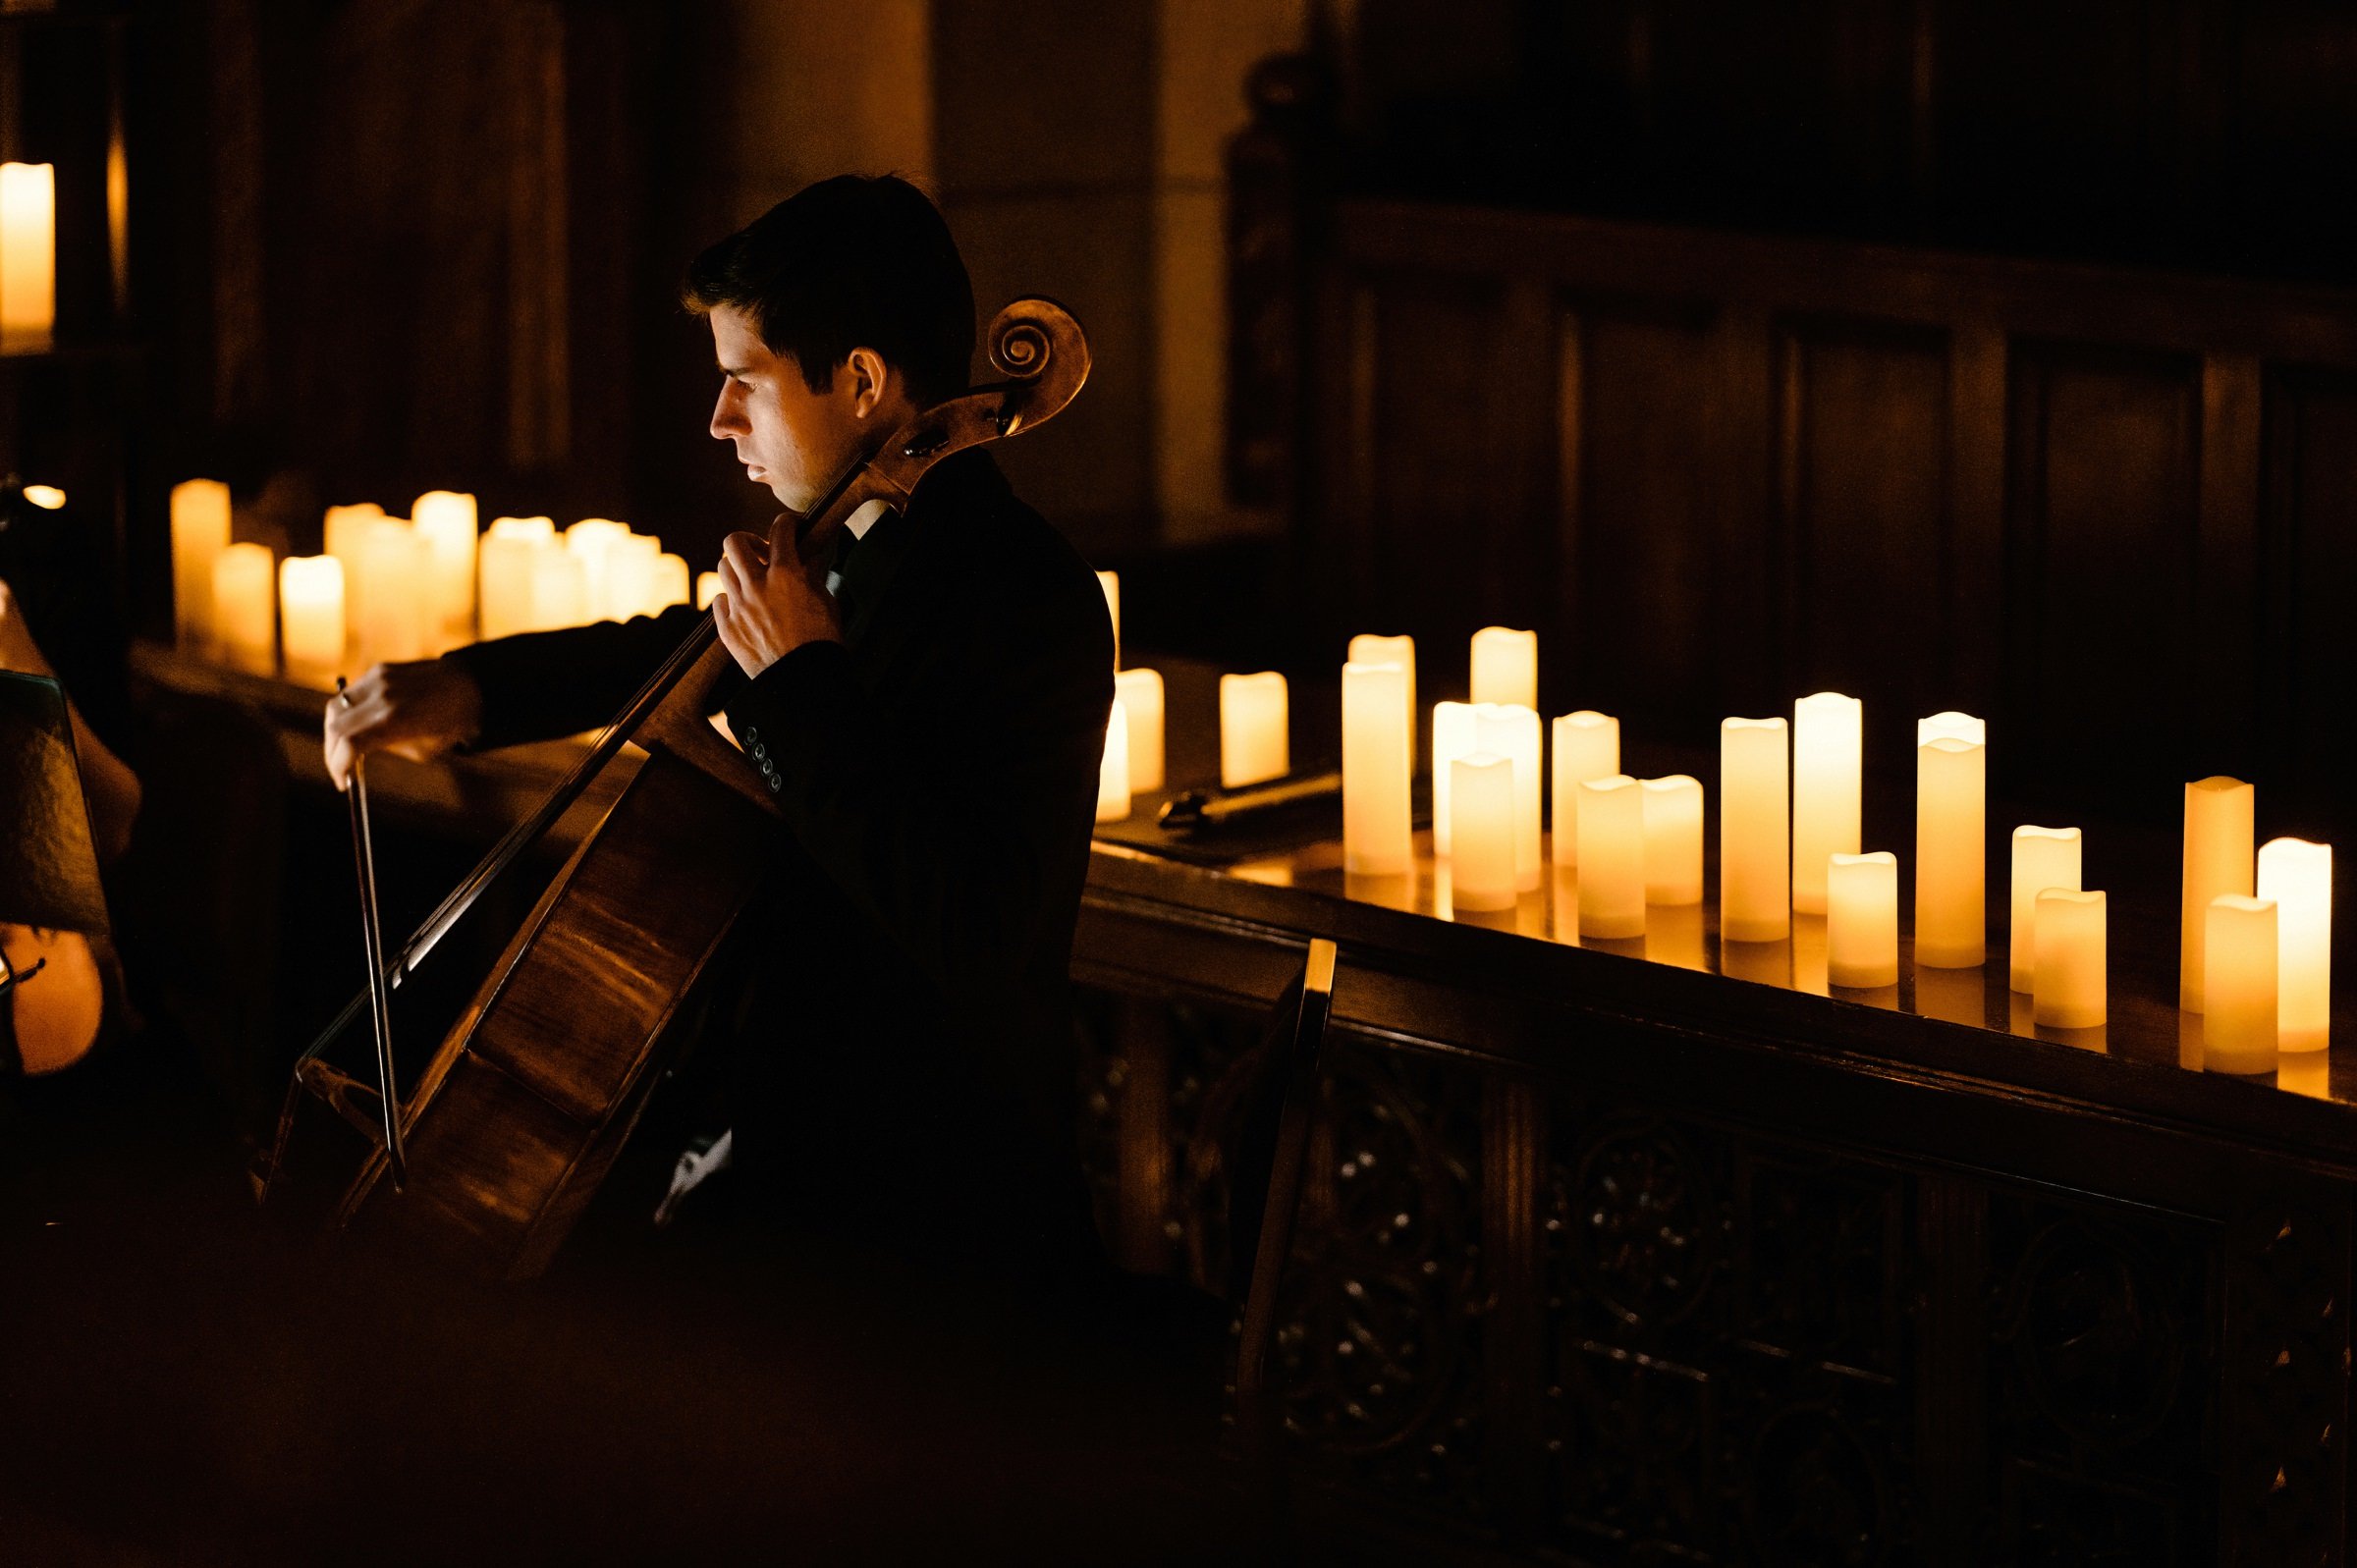 Grand Rapids Fountain Street Church Candlelight Concert Performance - Photographed for Fever by Ryan Inman - 18.jpg